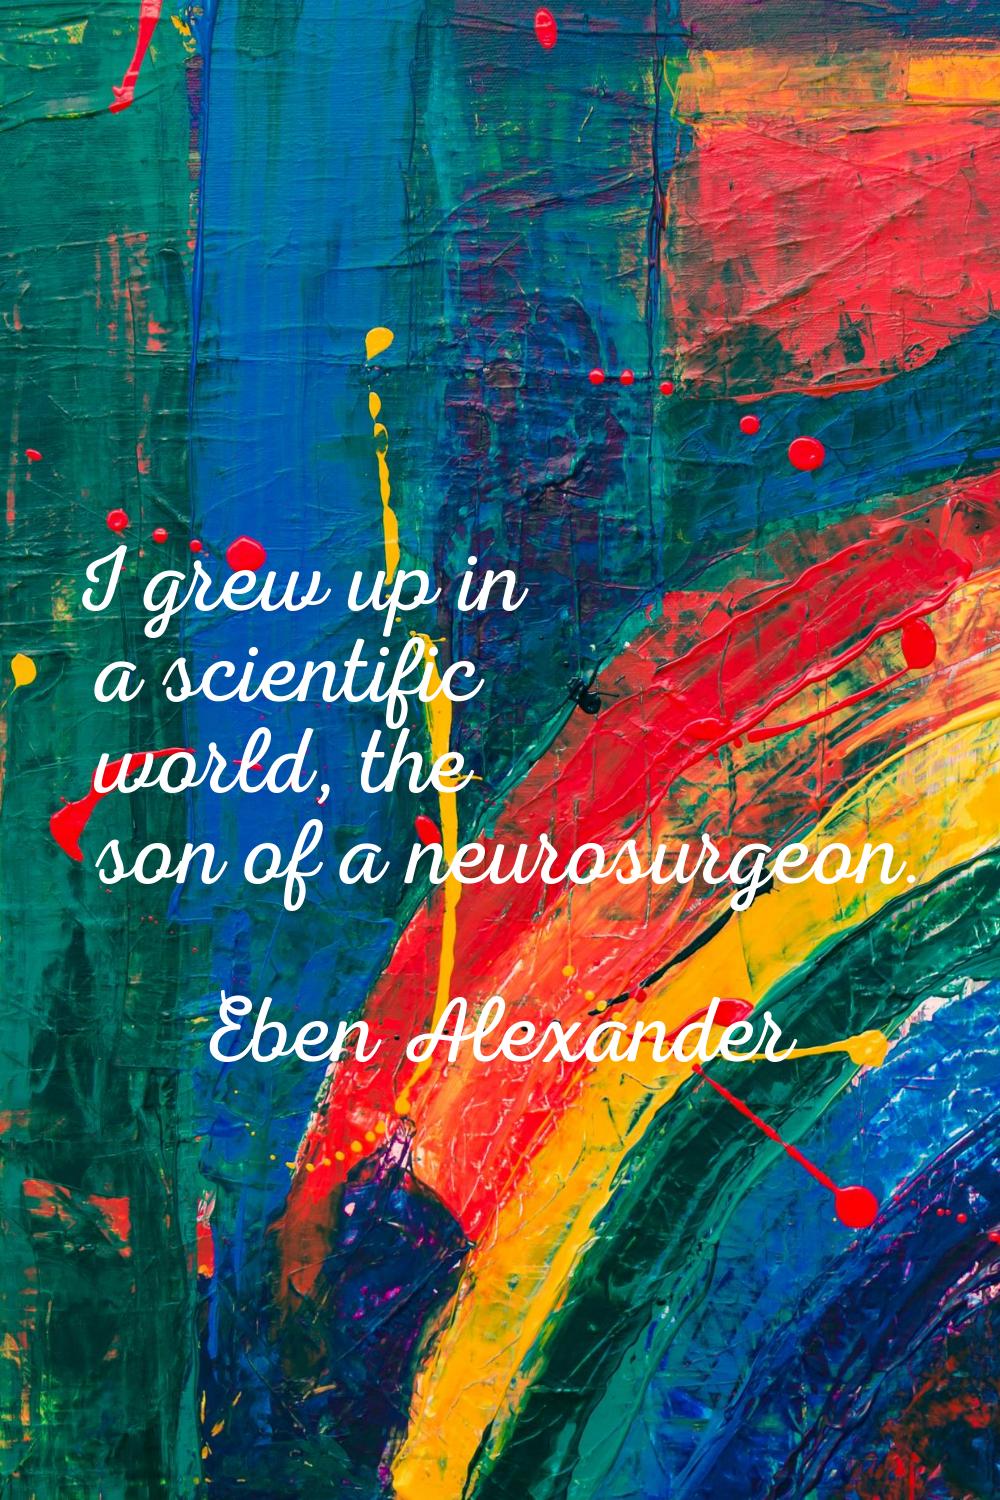 I grew up in a scientific world, the son of a neurosurgeon.